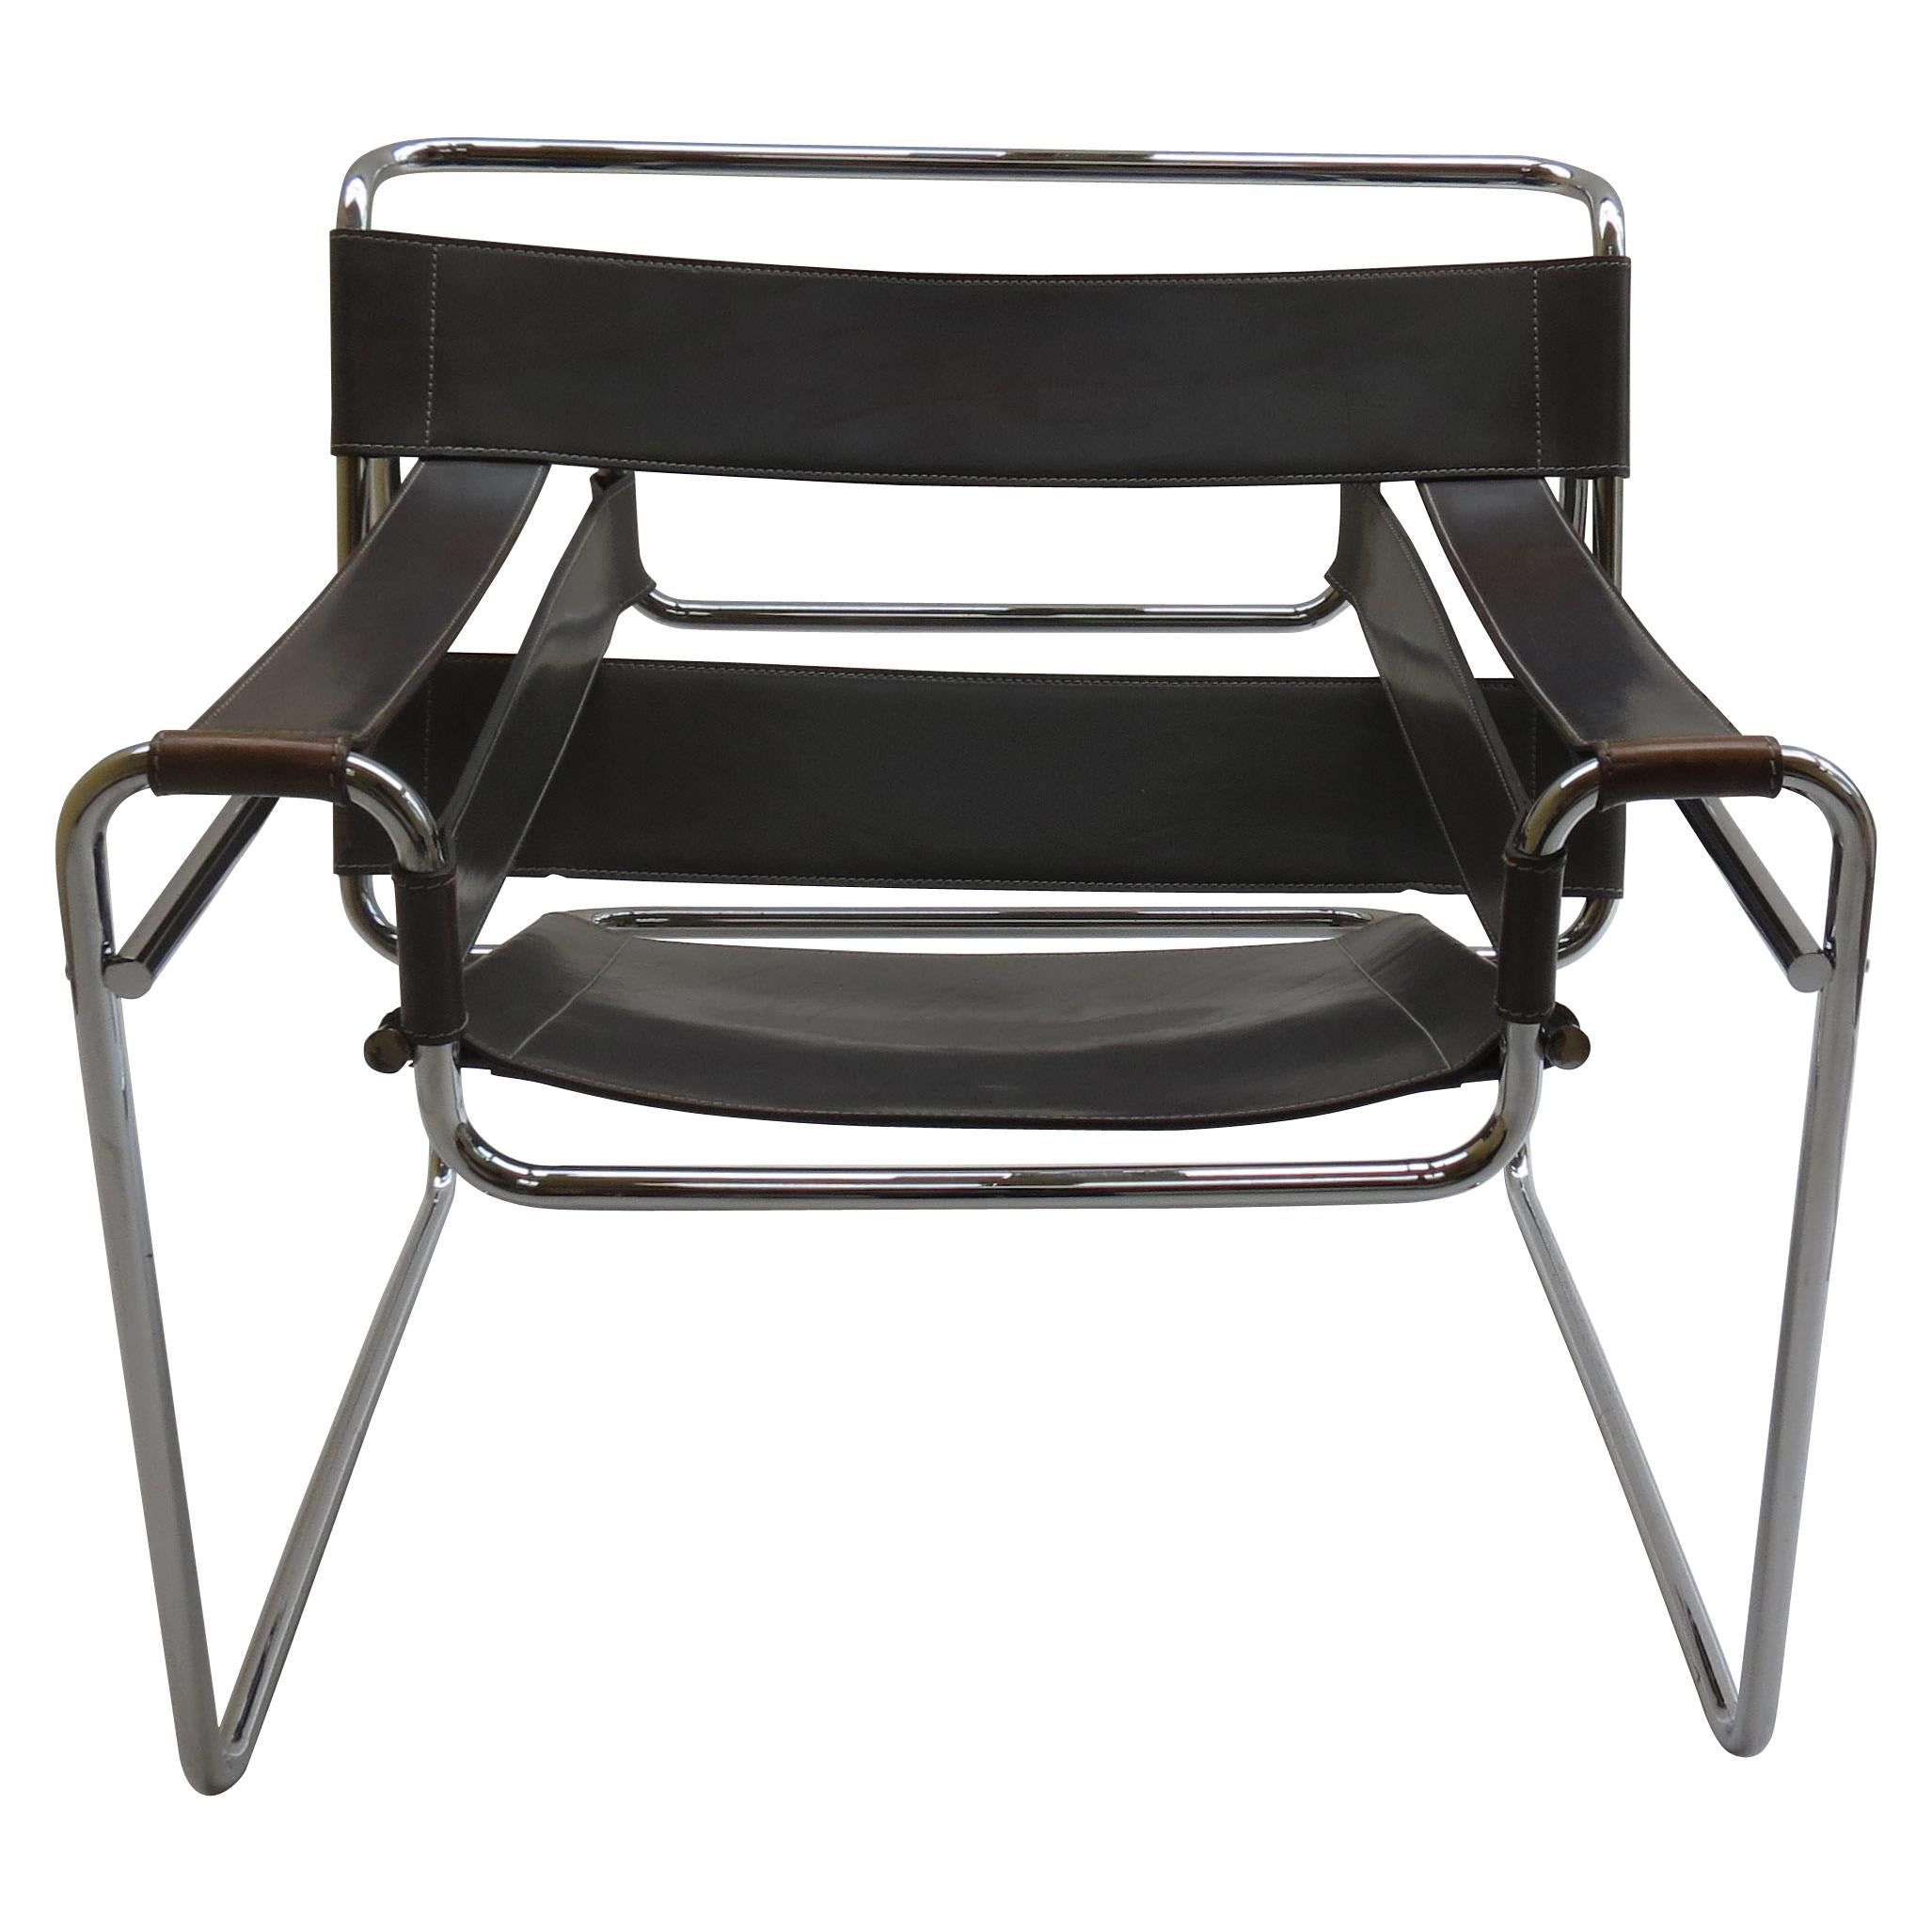 1980s Grey Bauhaus Wassily Chair by Marcel Breuer for Knoll 2 Available B